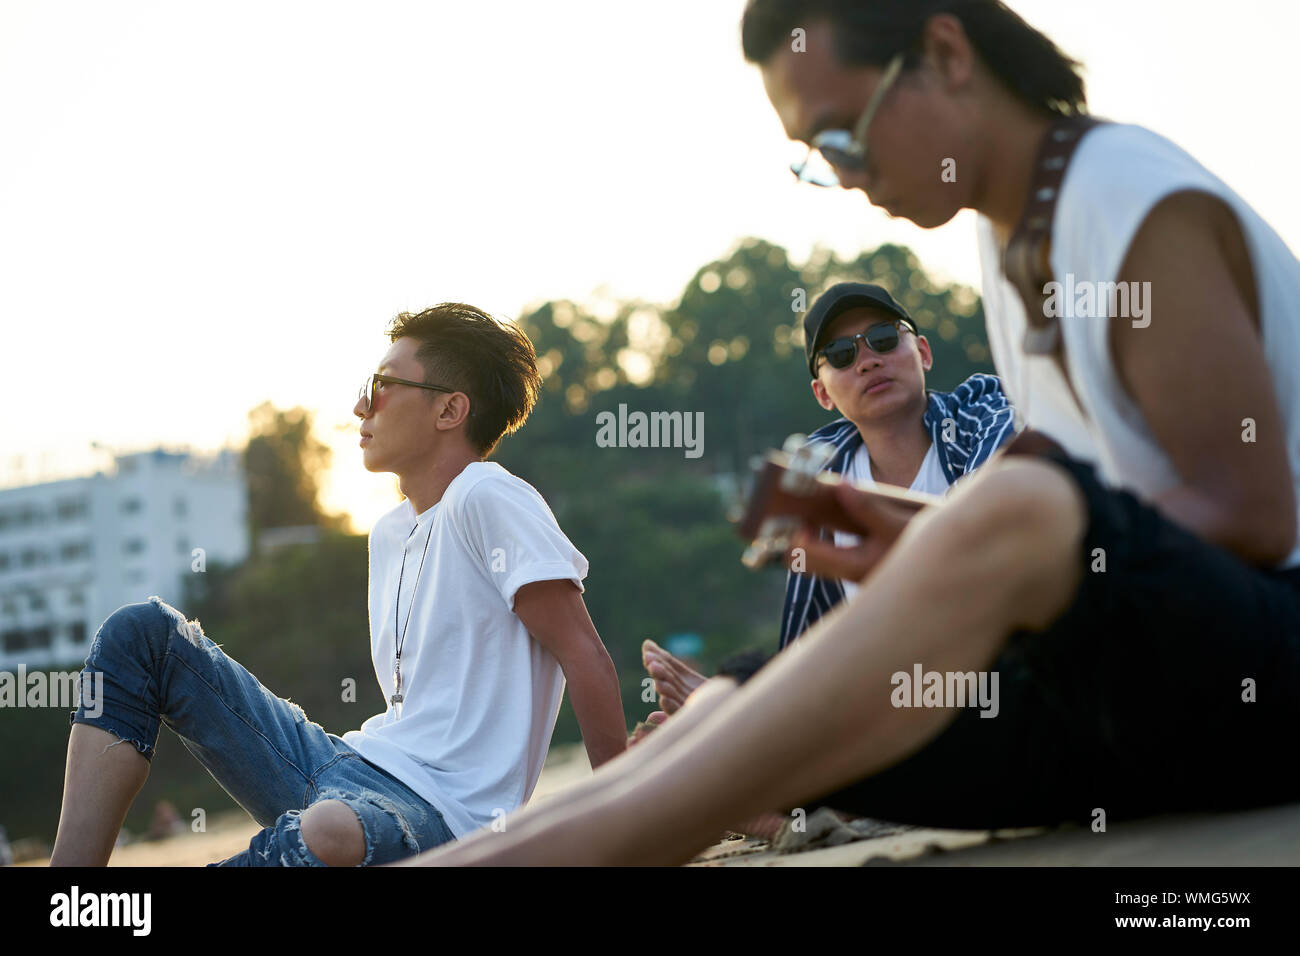 young asian adult men sitting on beach relaxing and playing guitar Stock Photo